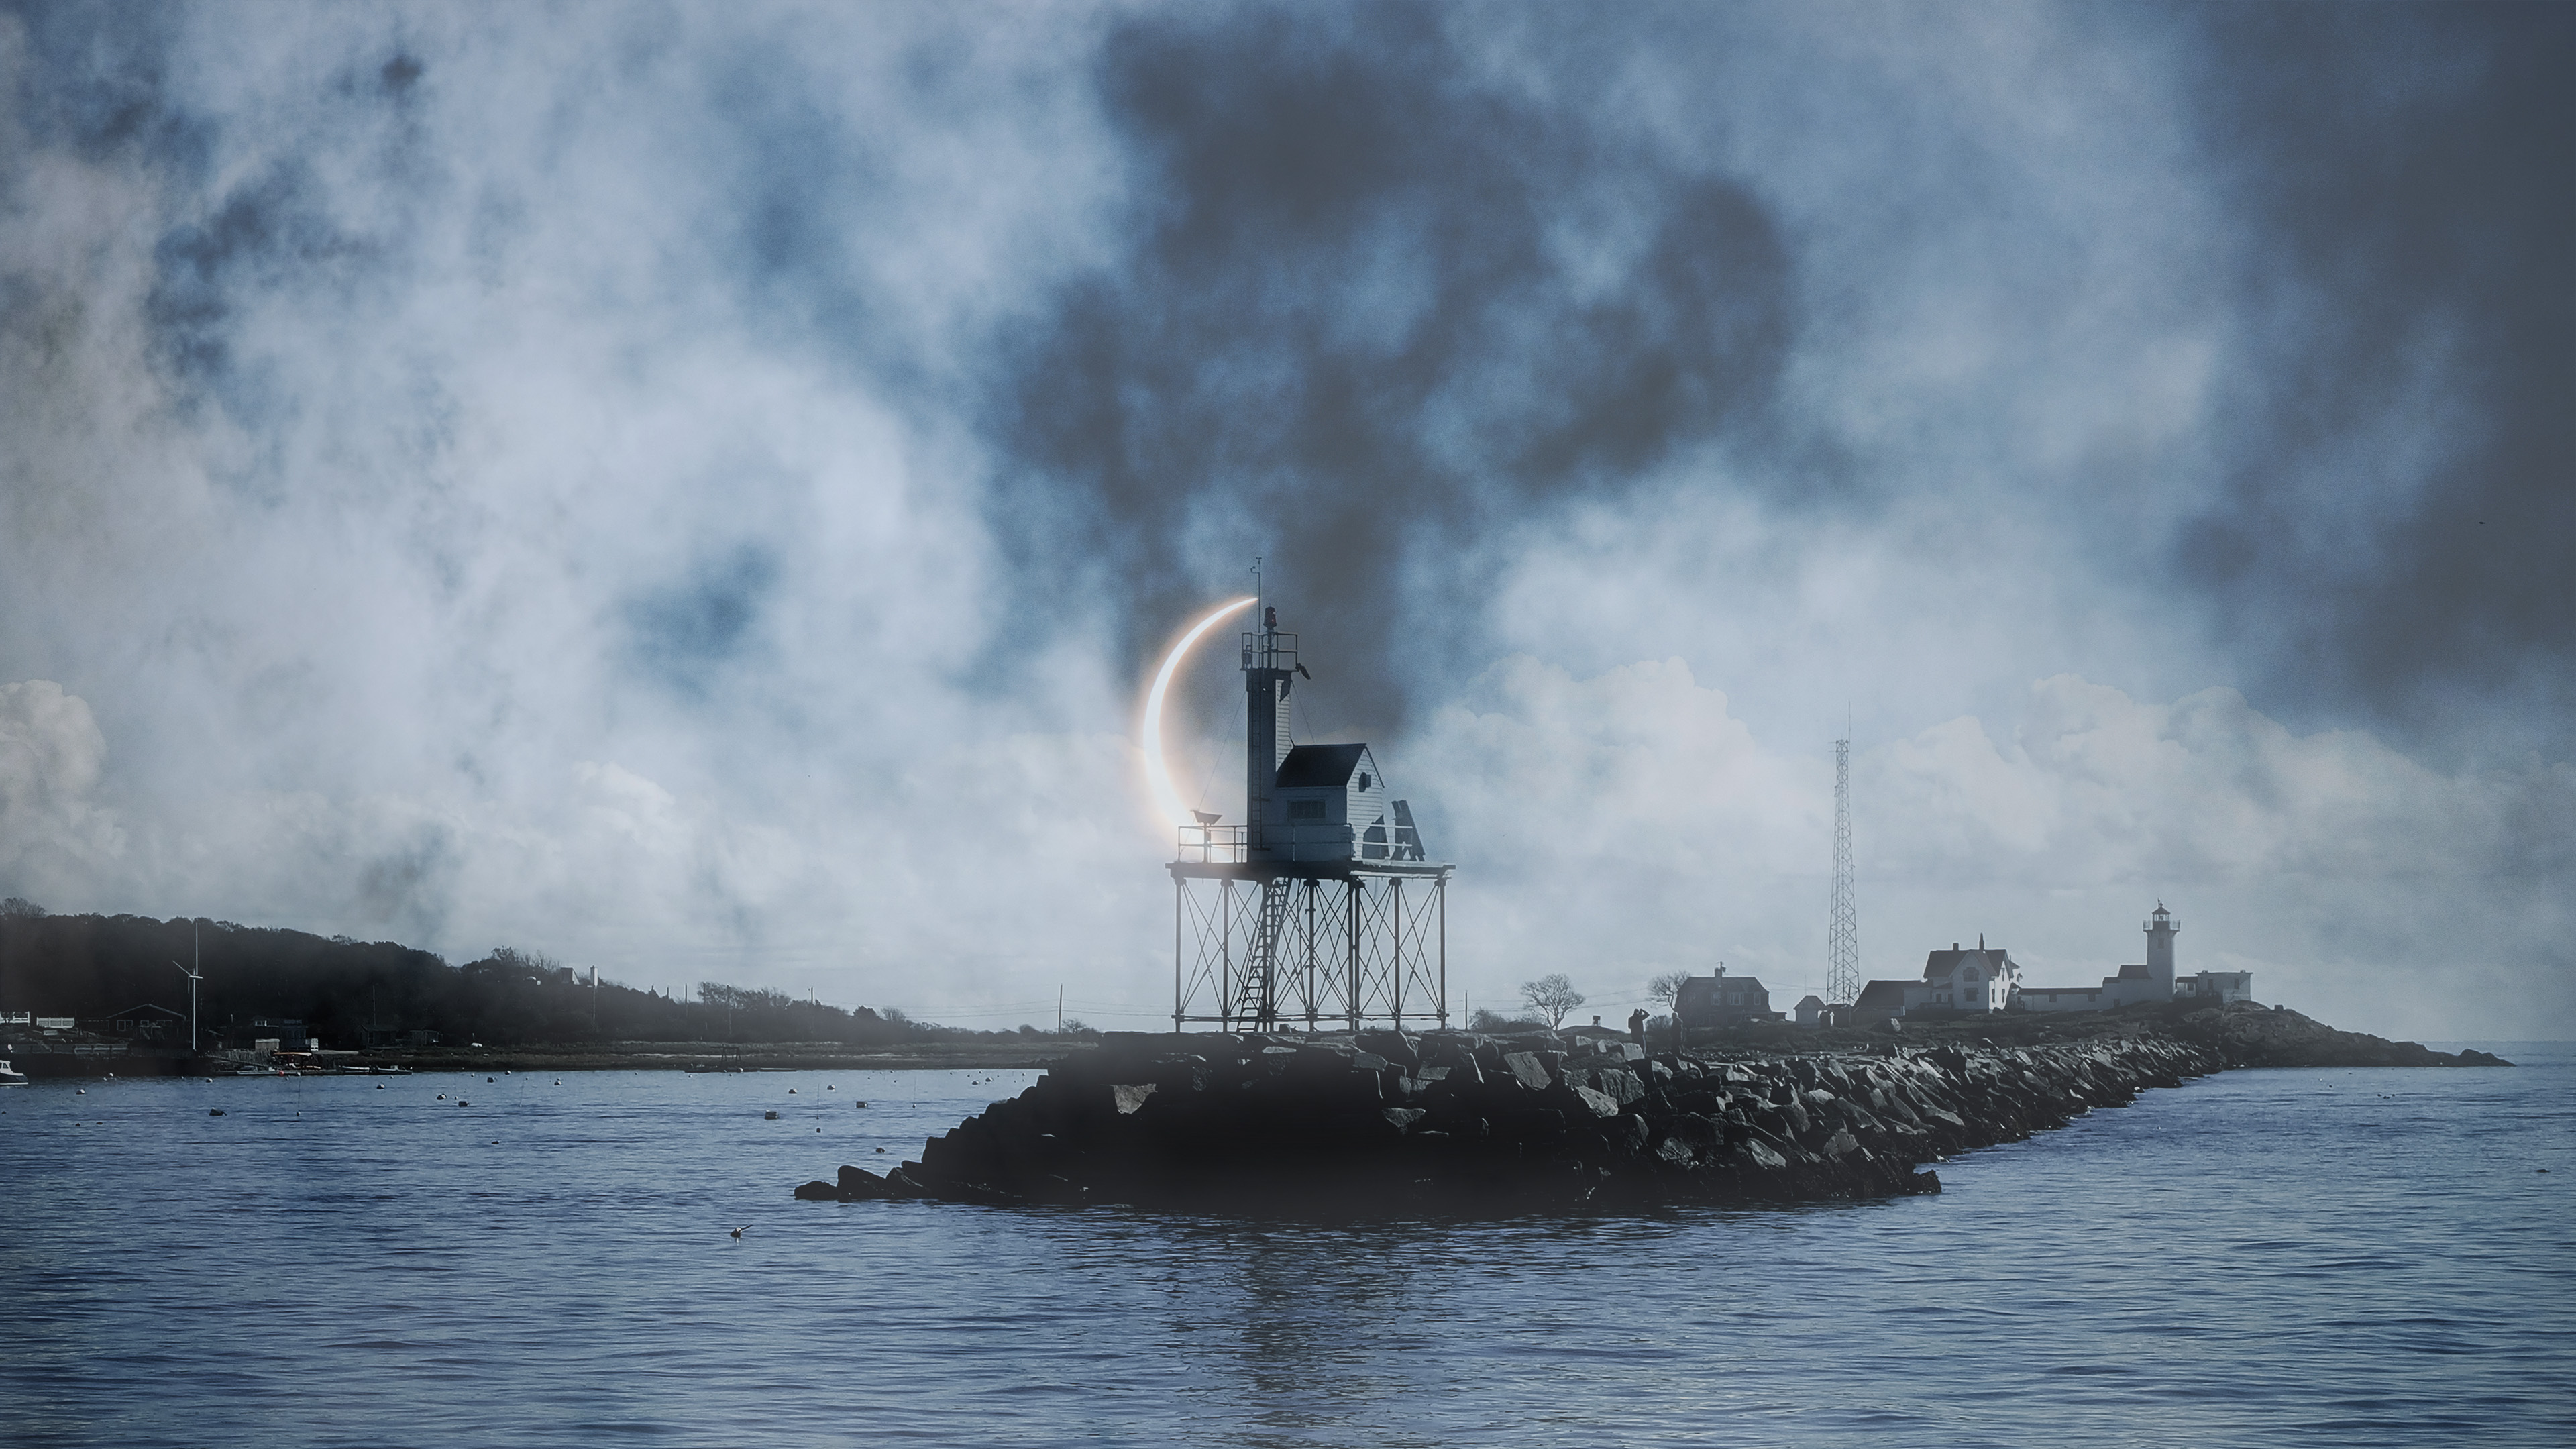 General 3840x2160 jessica Barton a coast Moon crescent moon lighthouse water sky outdoors